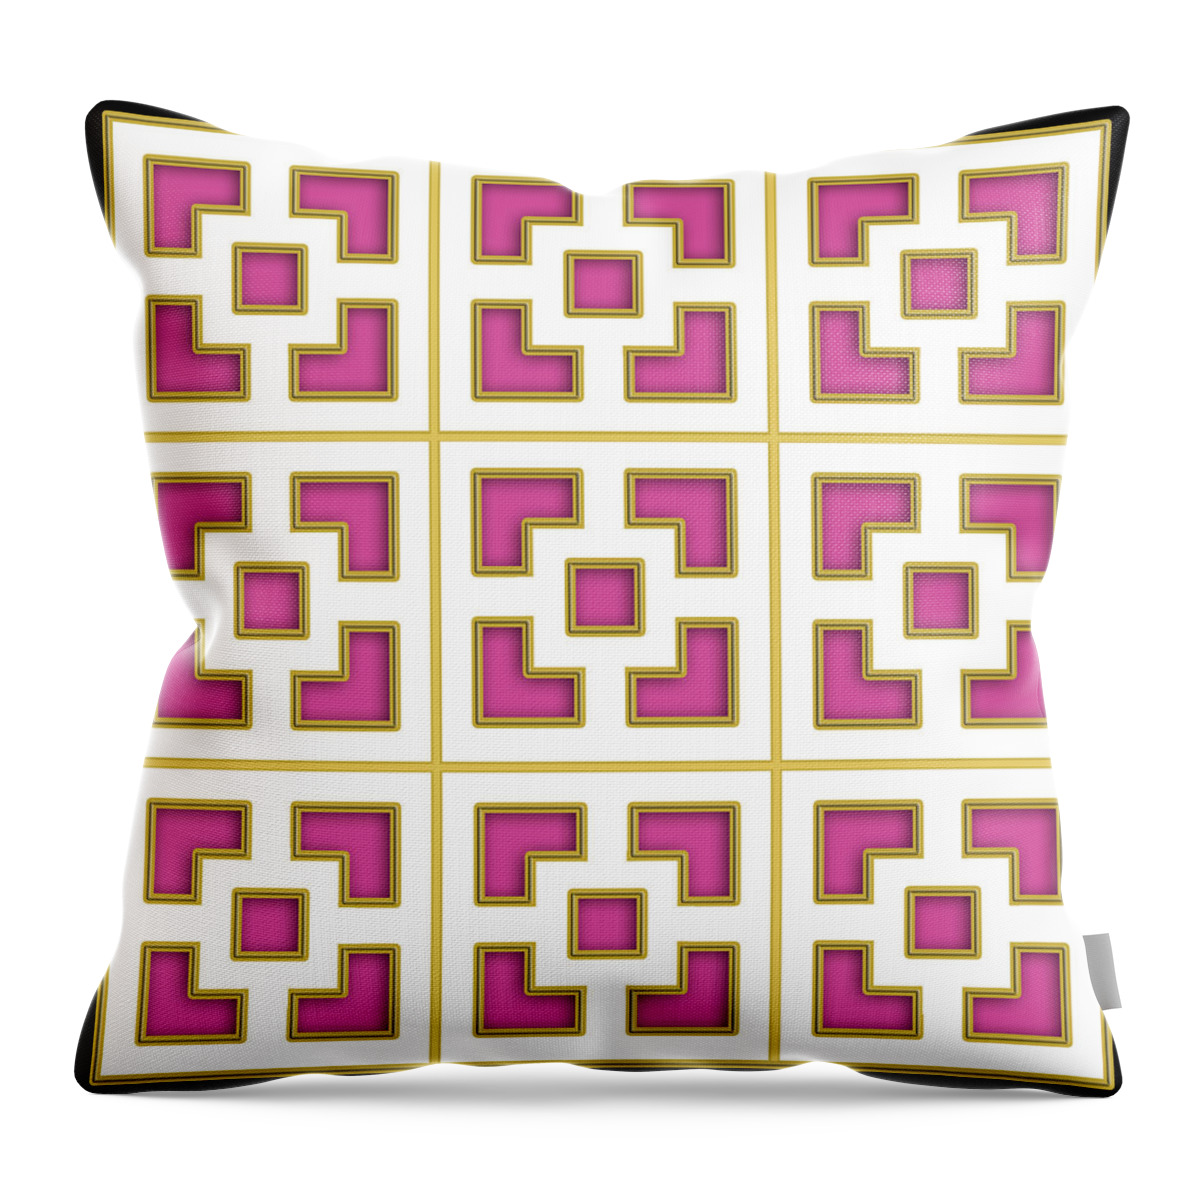 Pink - Chuck Staley Throw Pillow featuring the digital art Pink by Chuck Staley